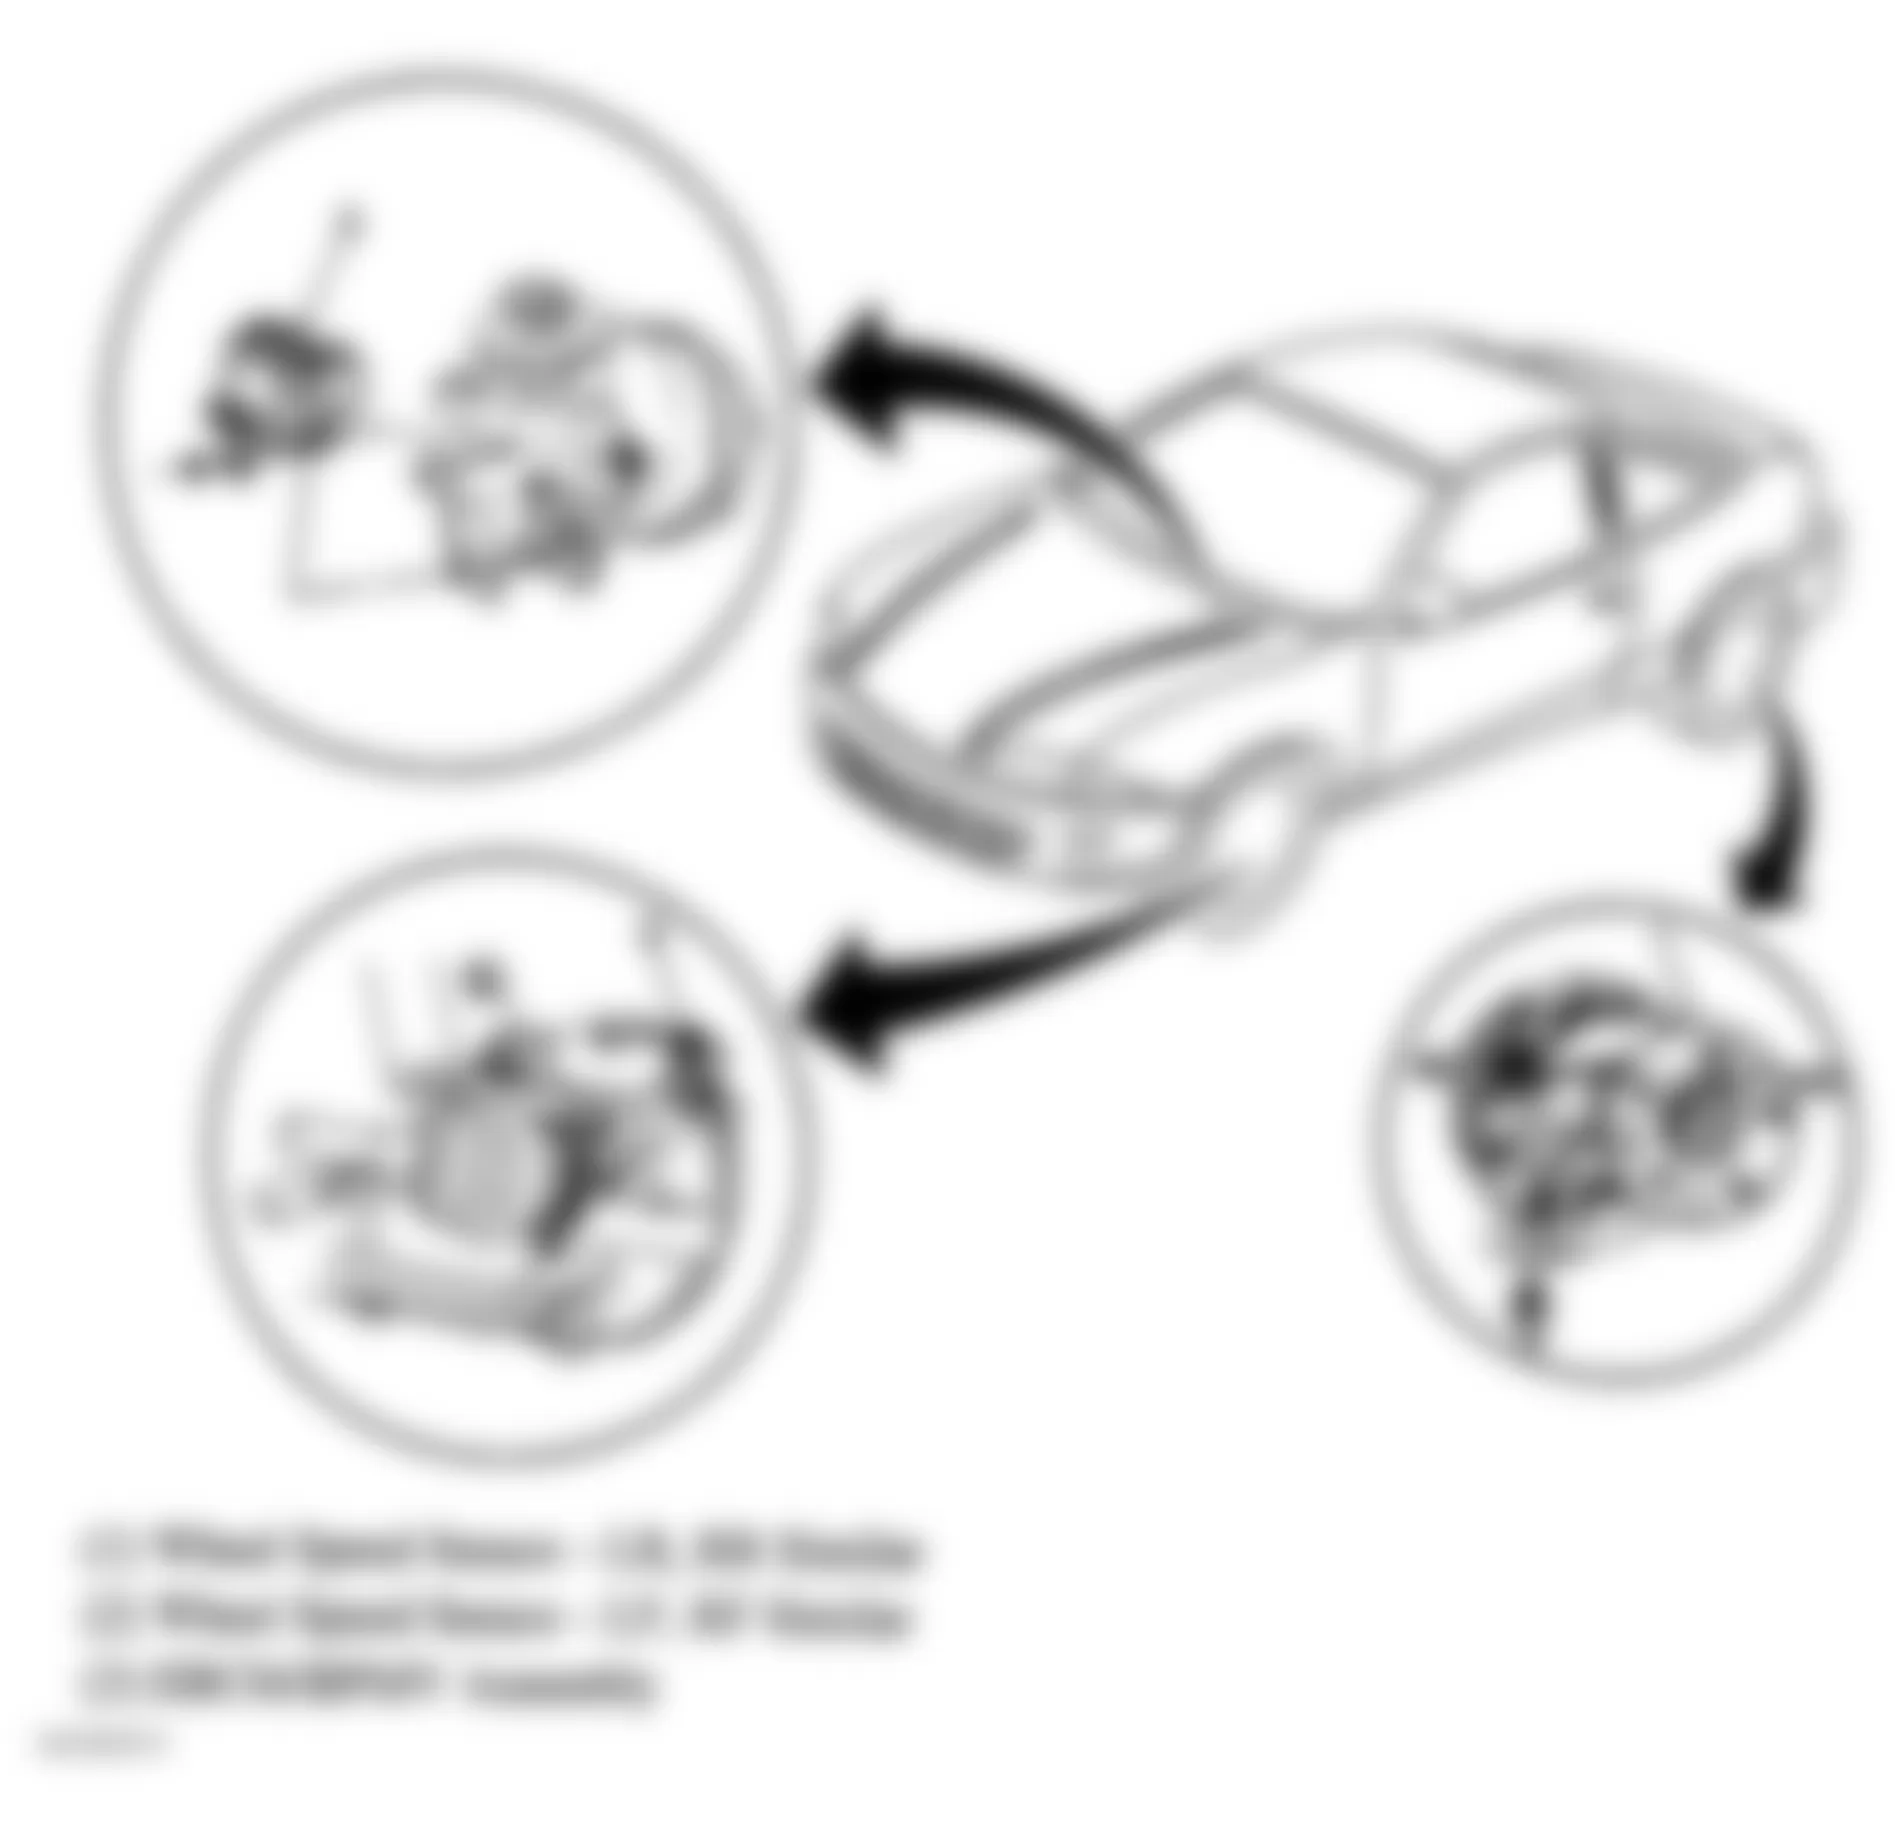 Chevrolet Cavalier LS 2004 - Component Locations -  Left Front Steering Knuckle, Left Rear Wheel Hub & Left Rear Of Engine Compartment